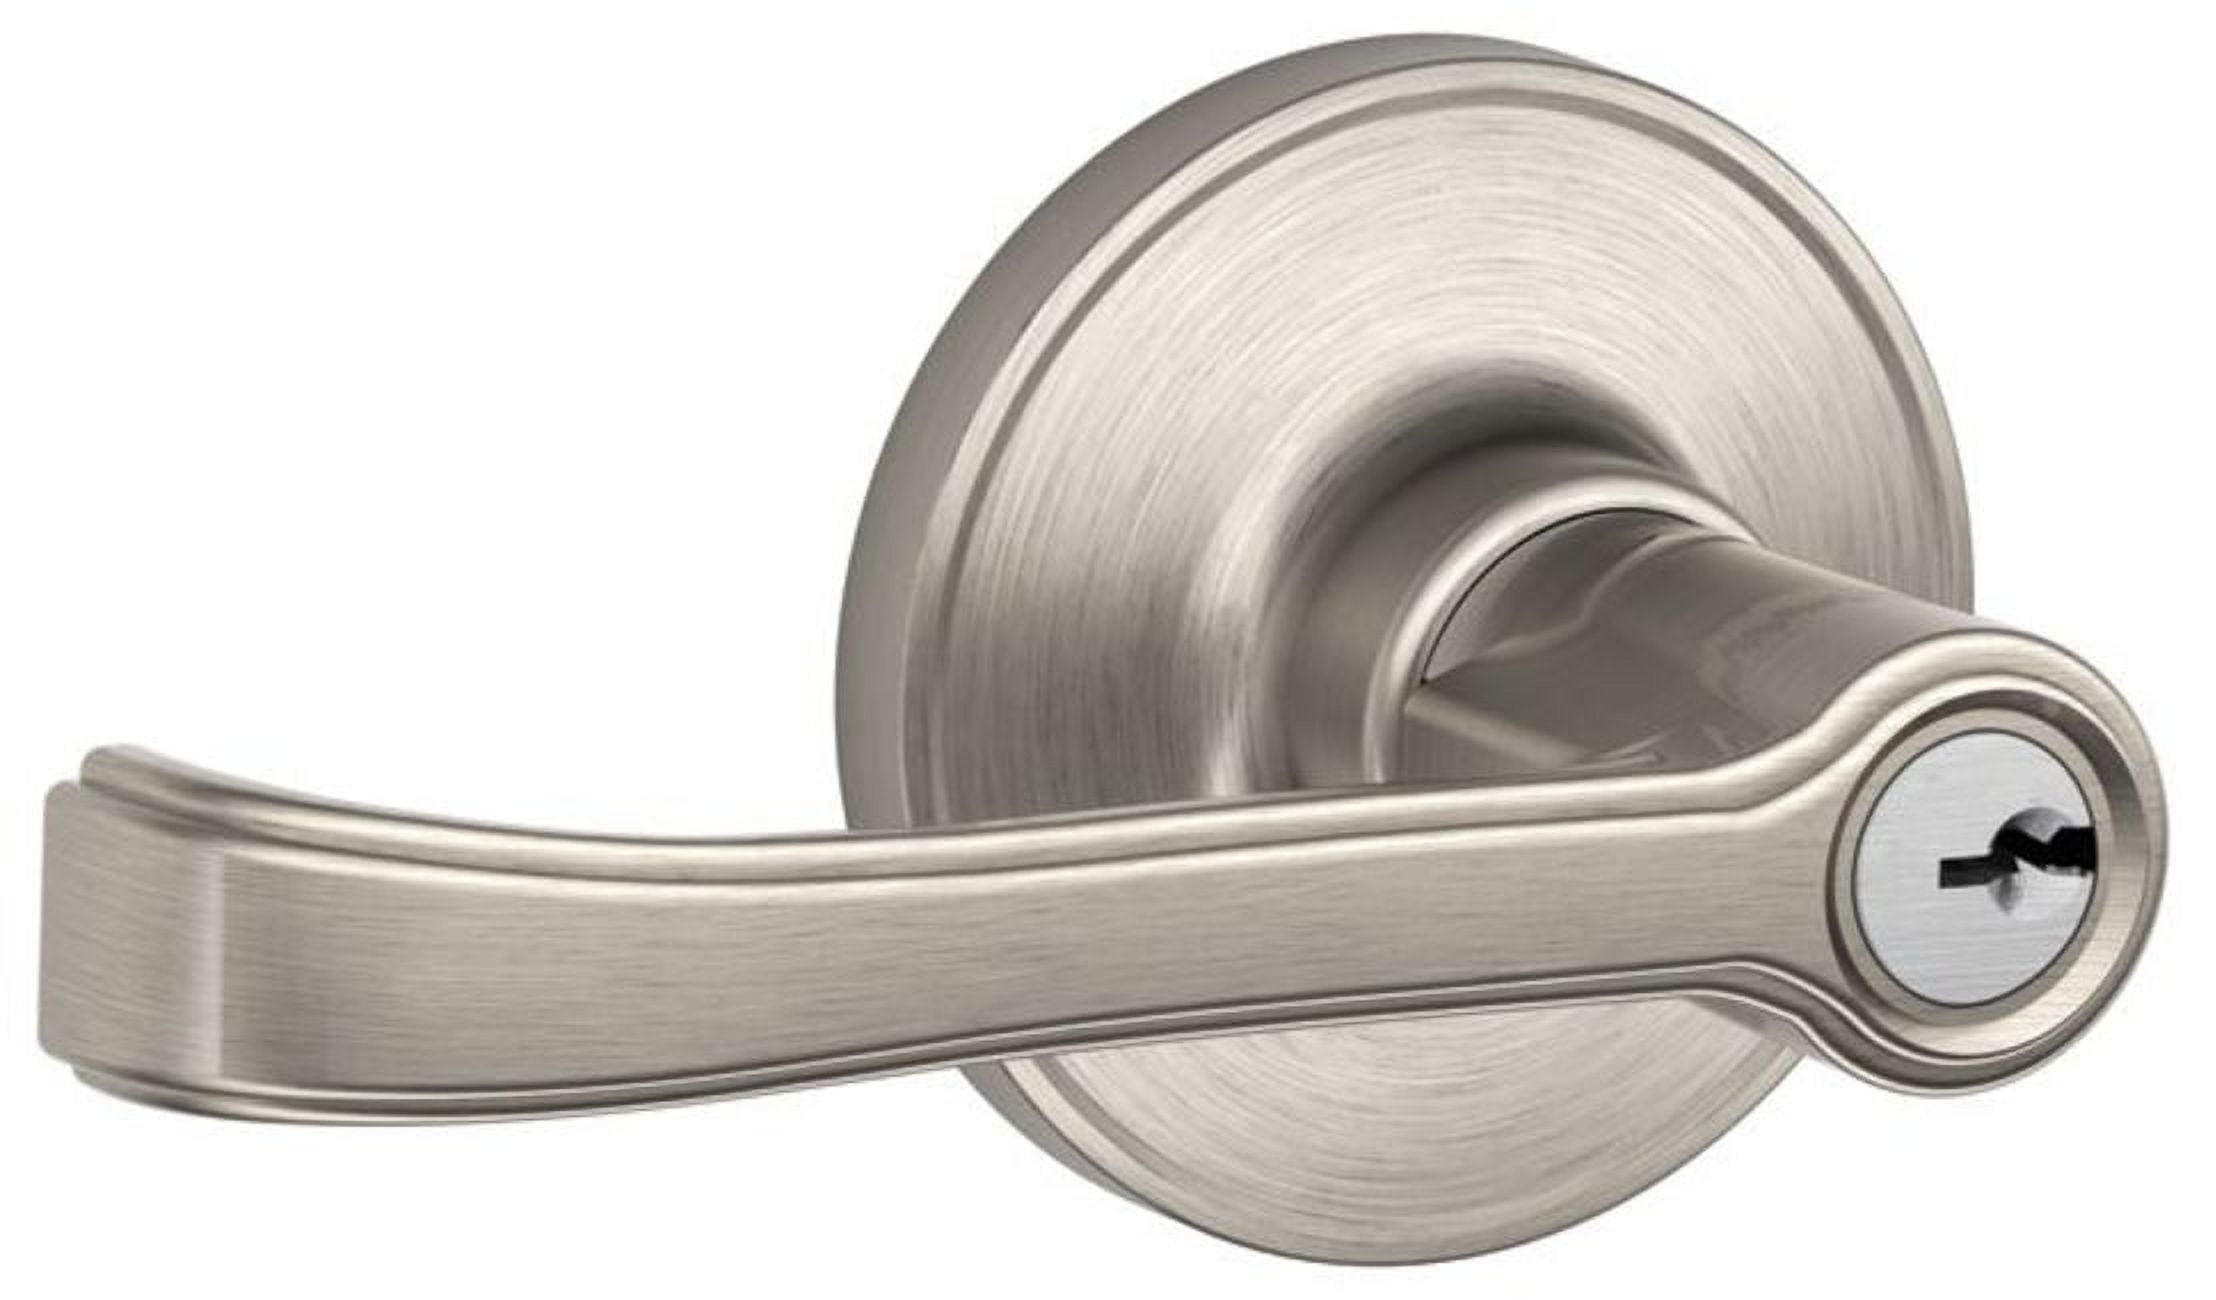 First Secure by Schlage Presley Keyed Entry Door Lever in Stainless Steel 